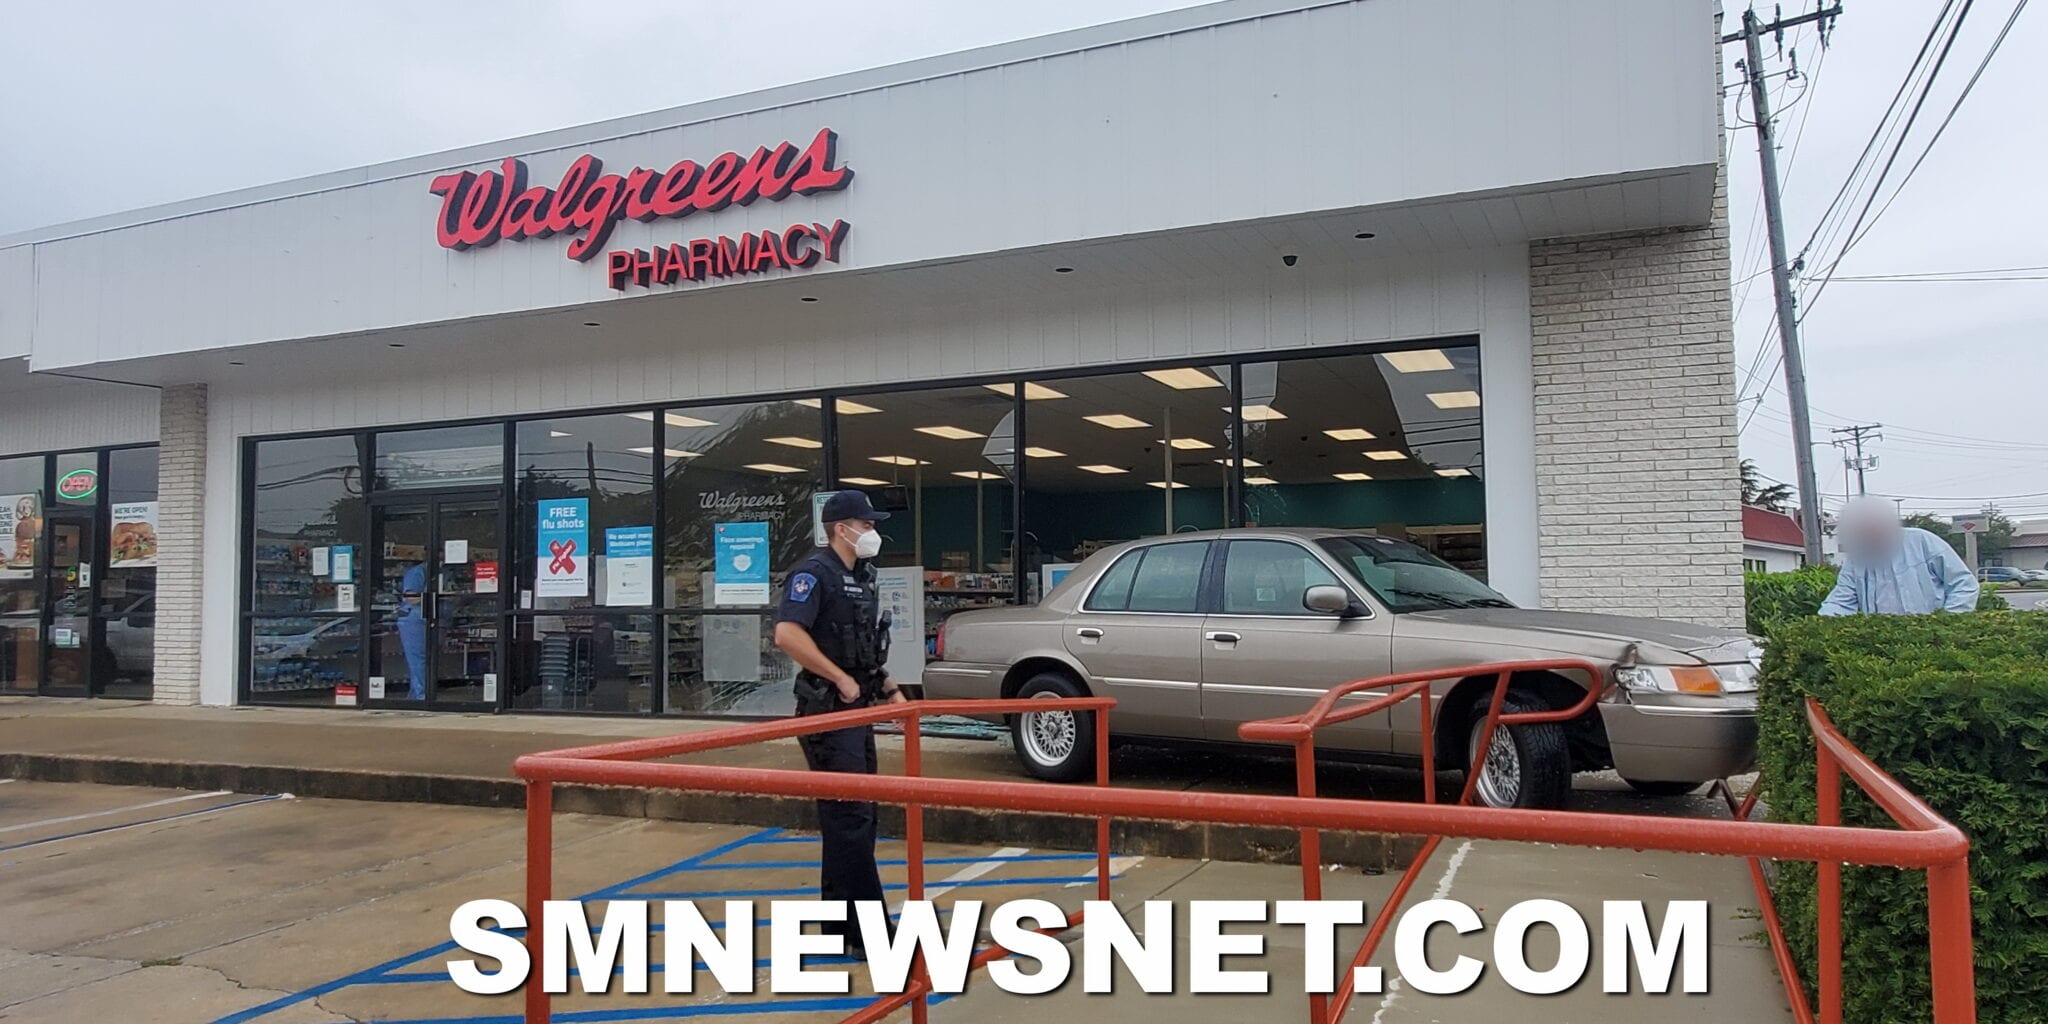 No Injuries Reported After Vehicle Strikes Walgreens Pharmacy in